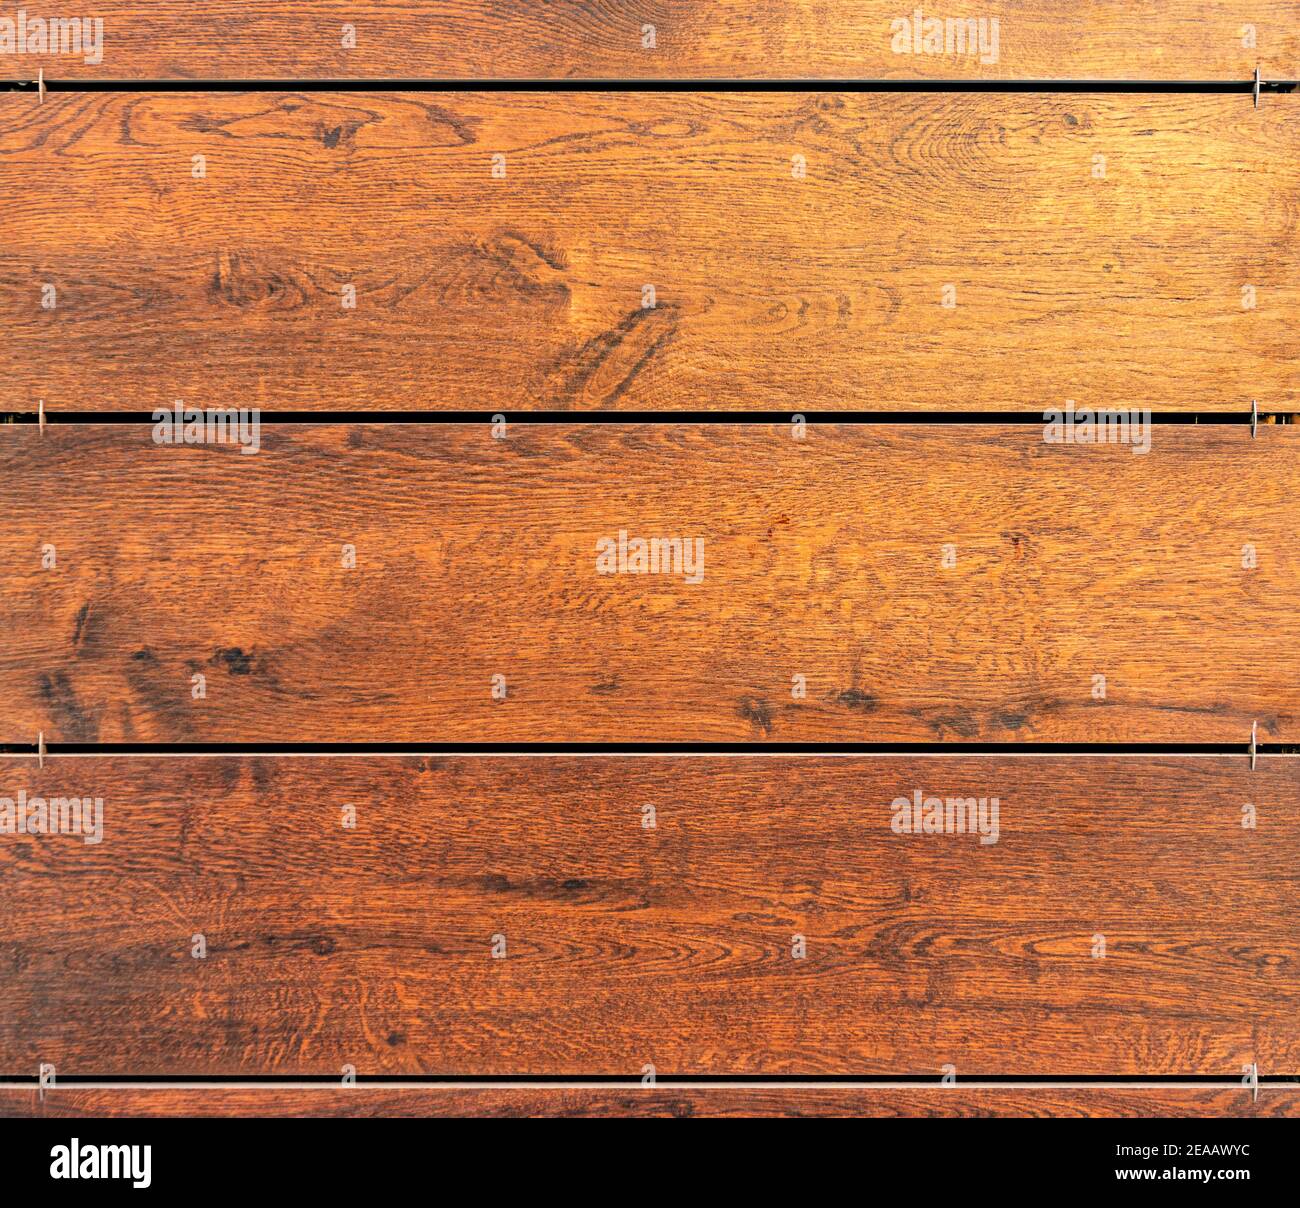 Shabby wooden background texture surface, wooden texture or background, close up Stock Photo